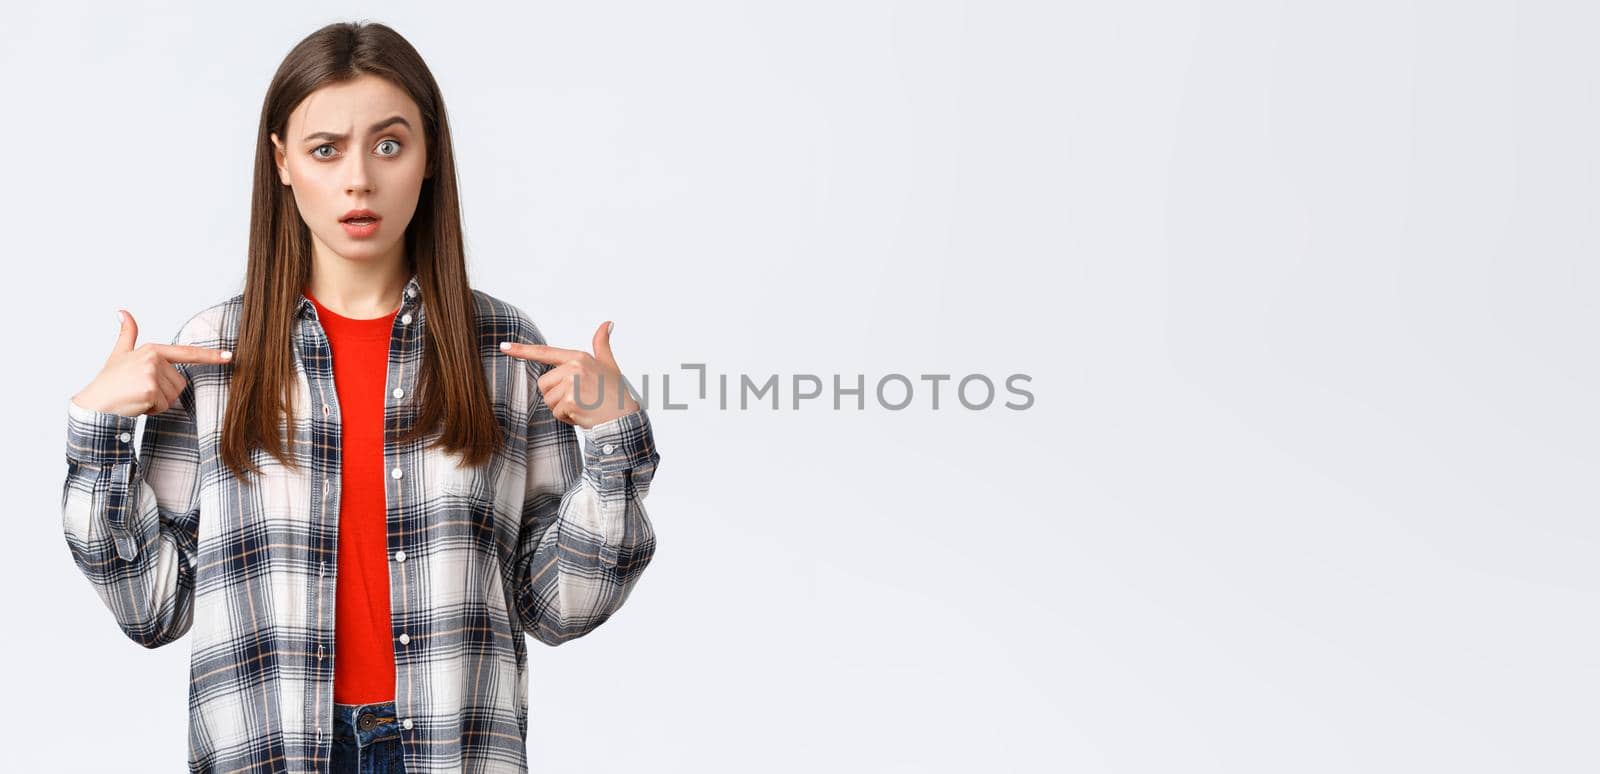 Lifestyle, different emotions, leisure activities concept. Confused young girl cant understand why she. Puzzled woman pointing at herself with raised eyebrow, being chosen, white background.